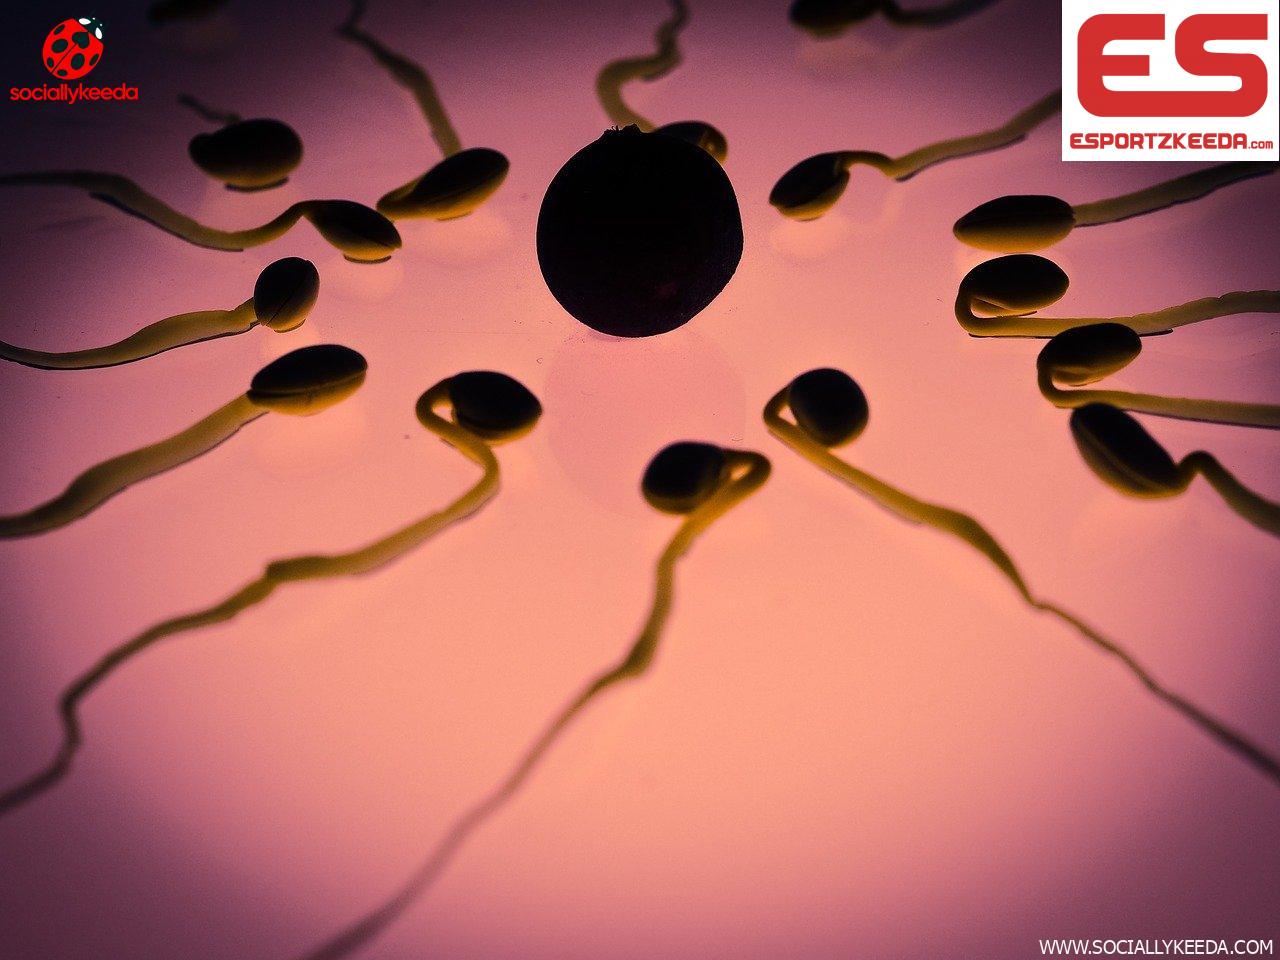 How can you increase the sperm count?